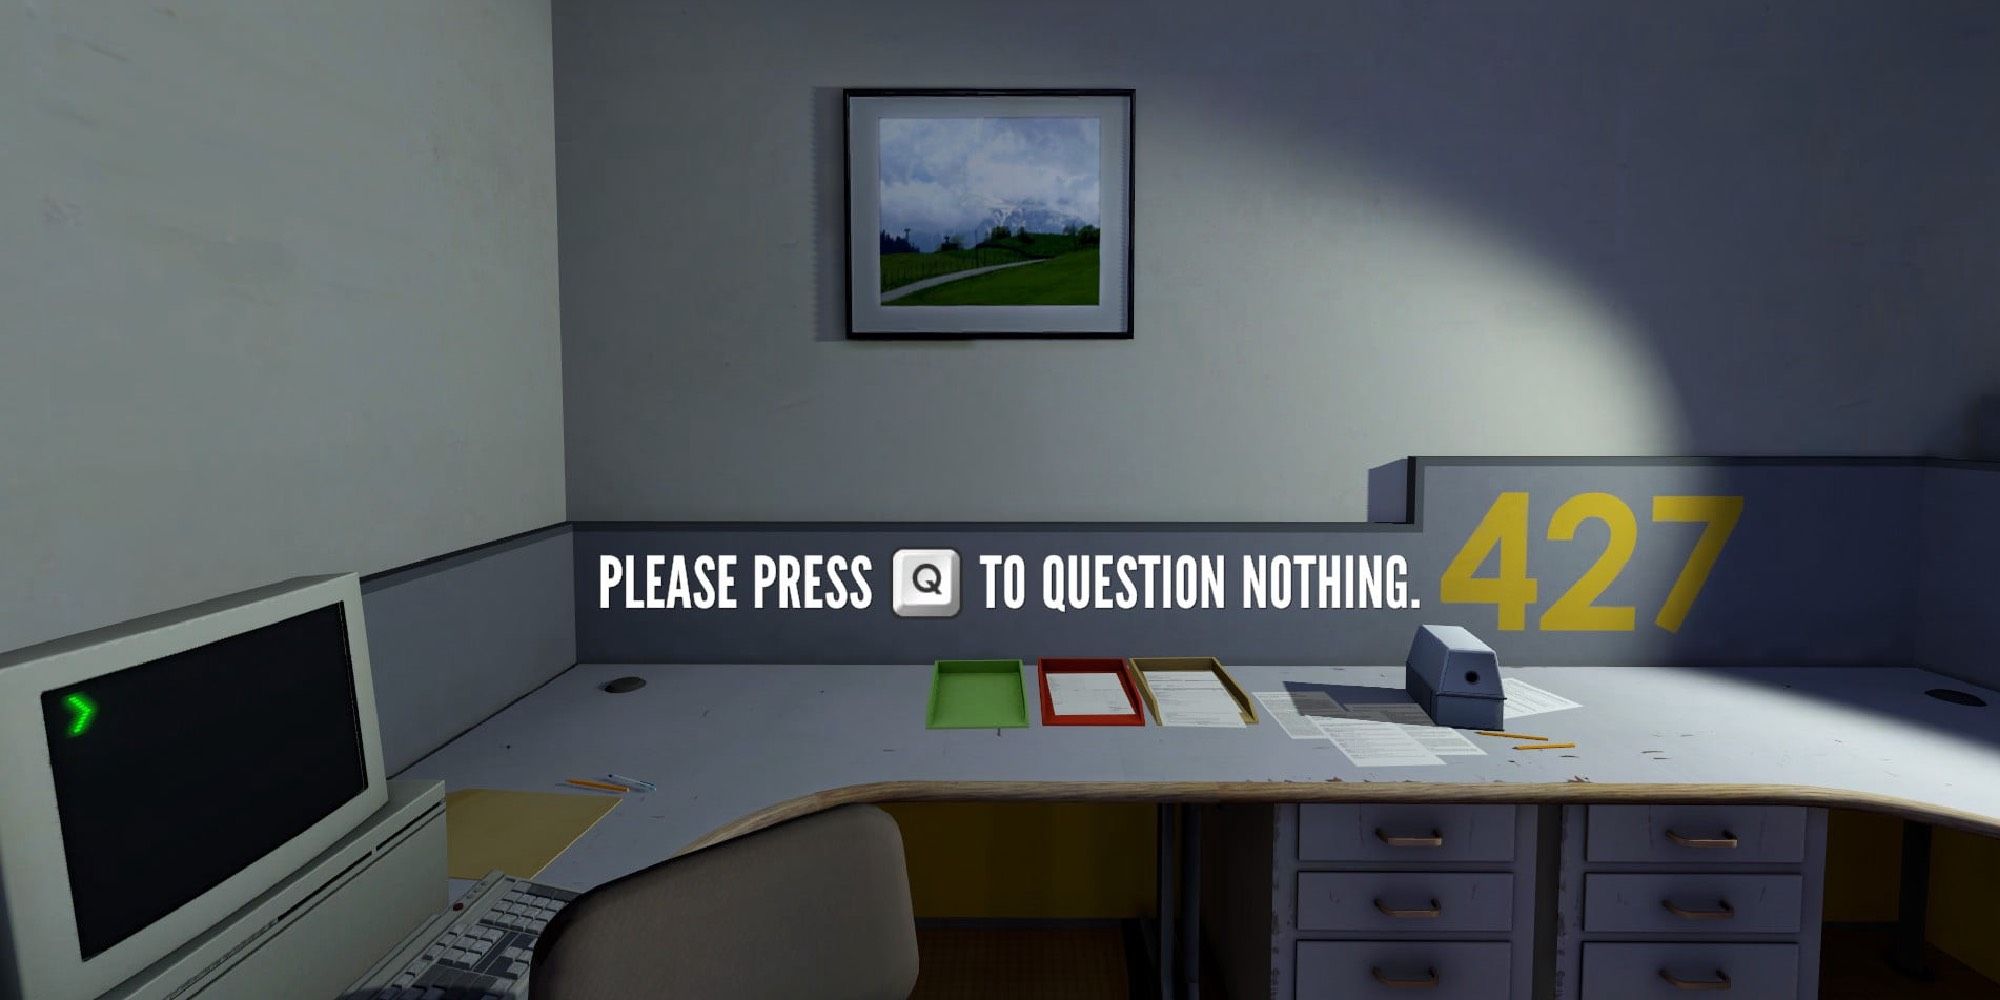 An office desk with the overlayed text "PLEASE PRESS Q TO QUESTION NOTHING."